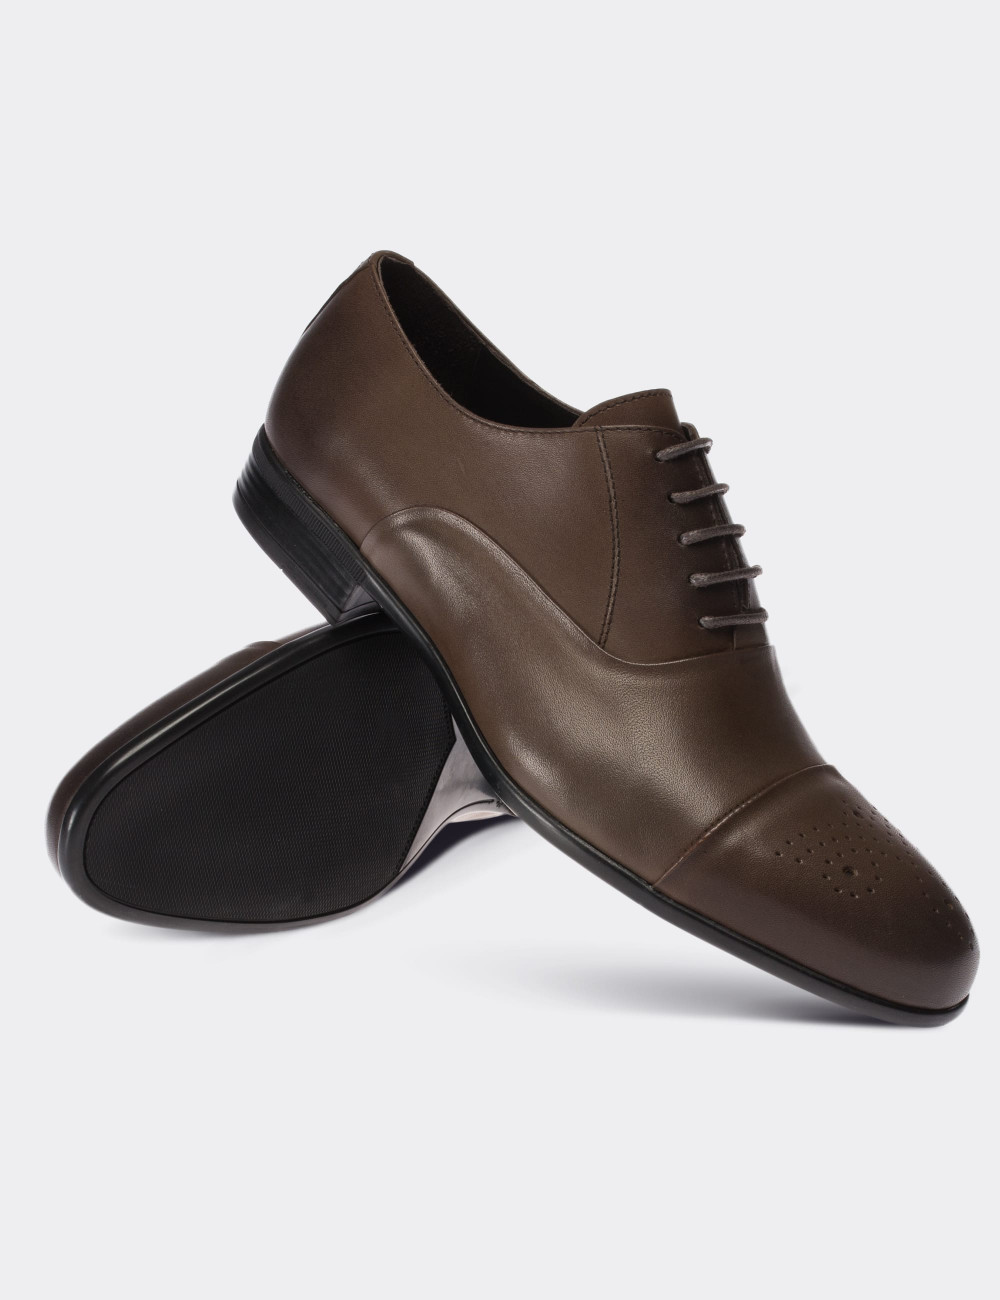 Sandstone  Leather Classic Shoes - 01653MVZNM02